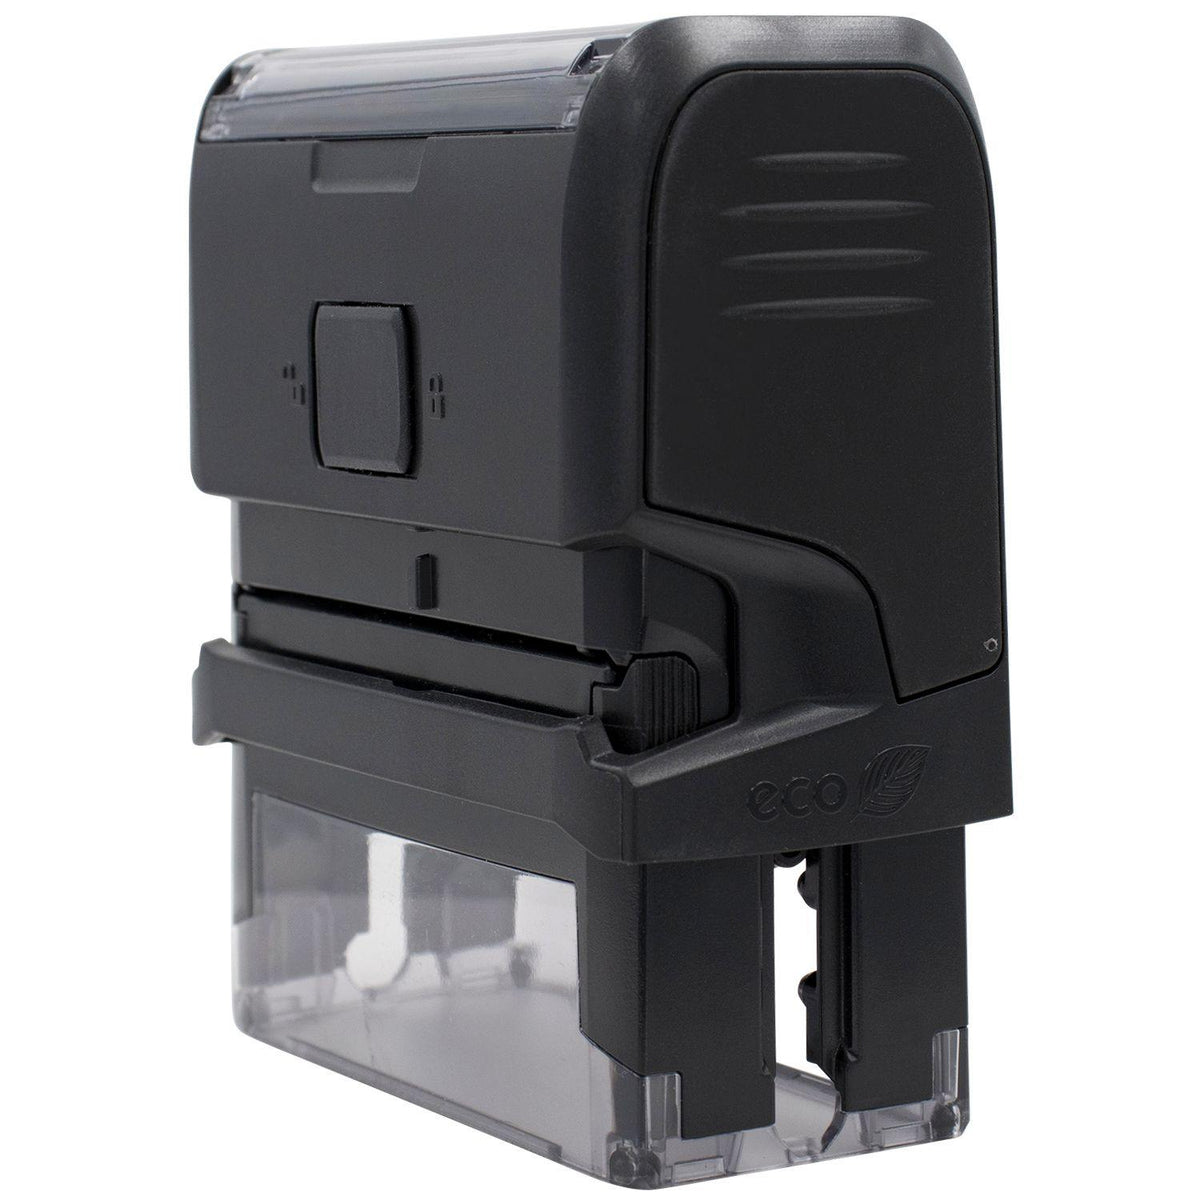 Self-Inking Bold Font File Stamp - Engineer Seal Stamps - Brand_Trodat, Impression Size_Small, Stamp Type_Self-Inking Stamp, Type of Use_General, Type of Use_Office